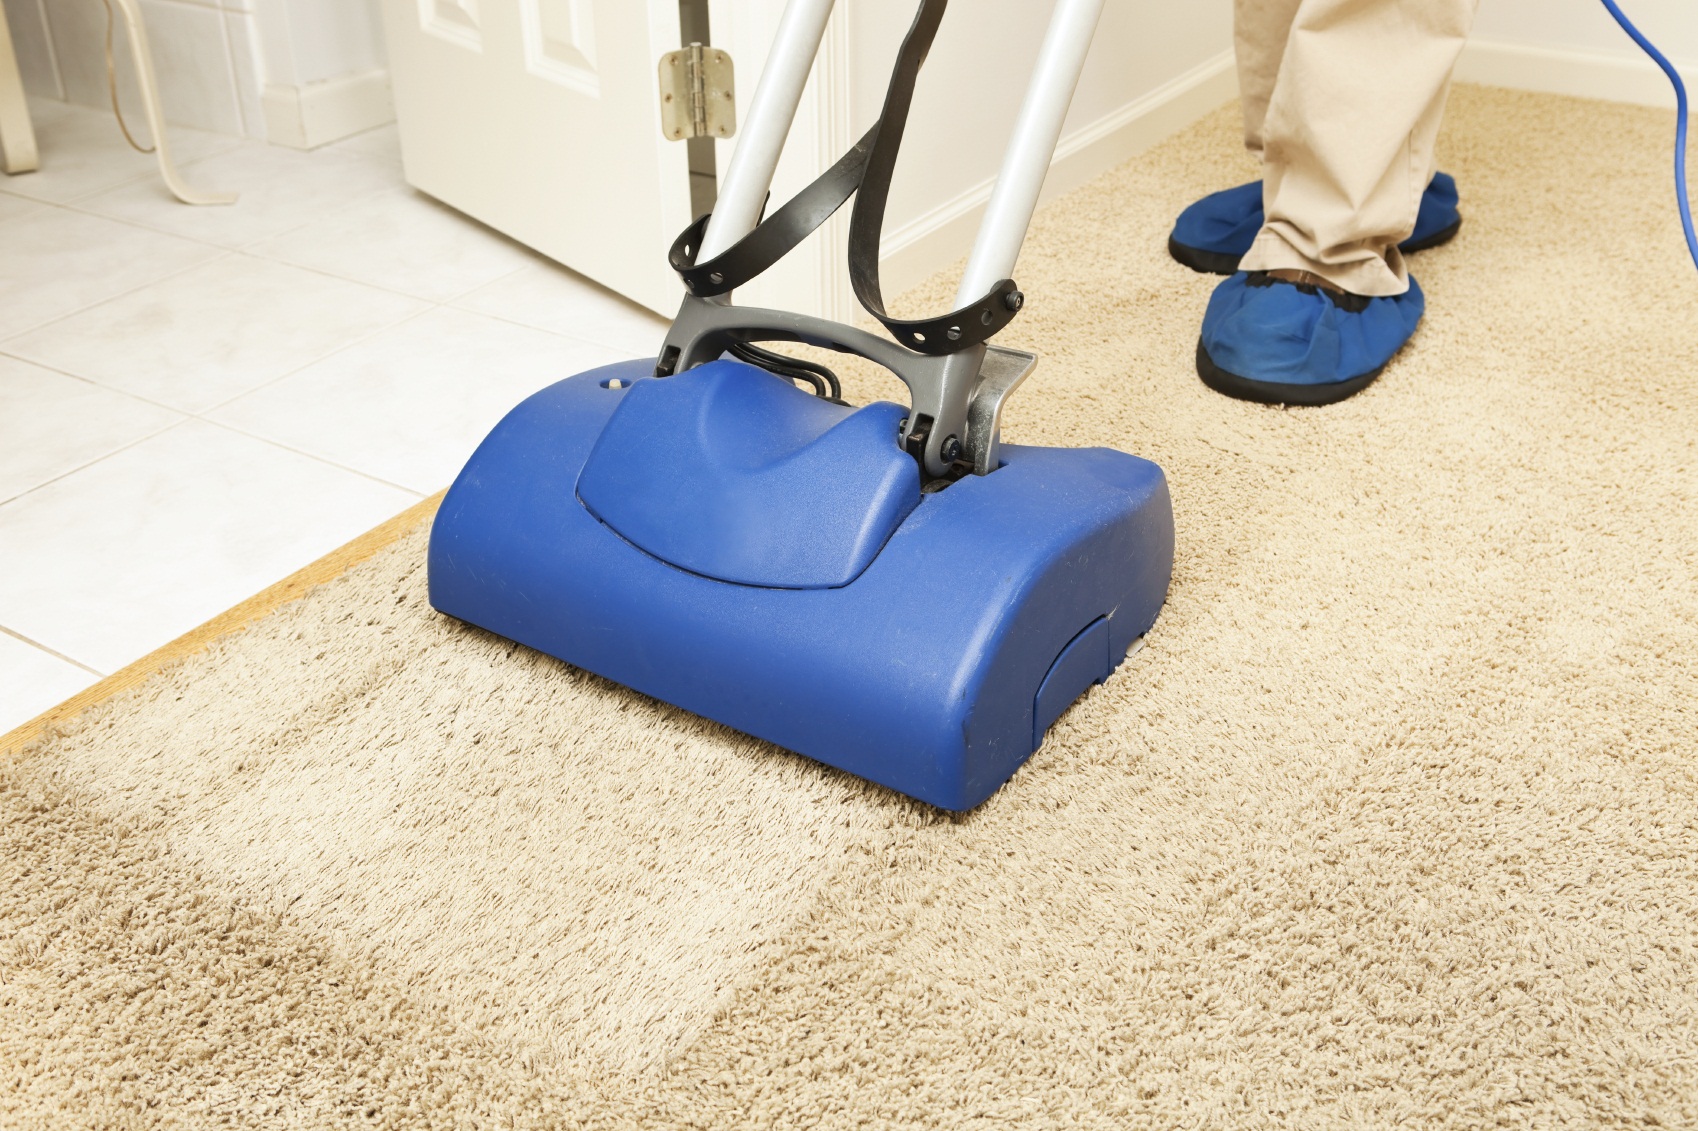 Get your carpet cleaned by professionals